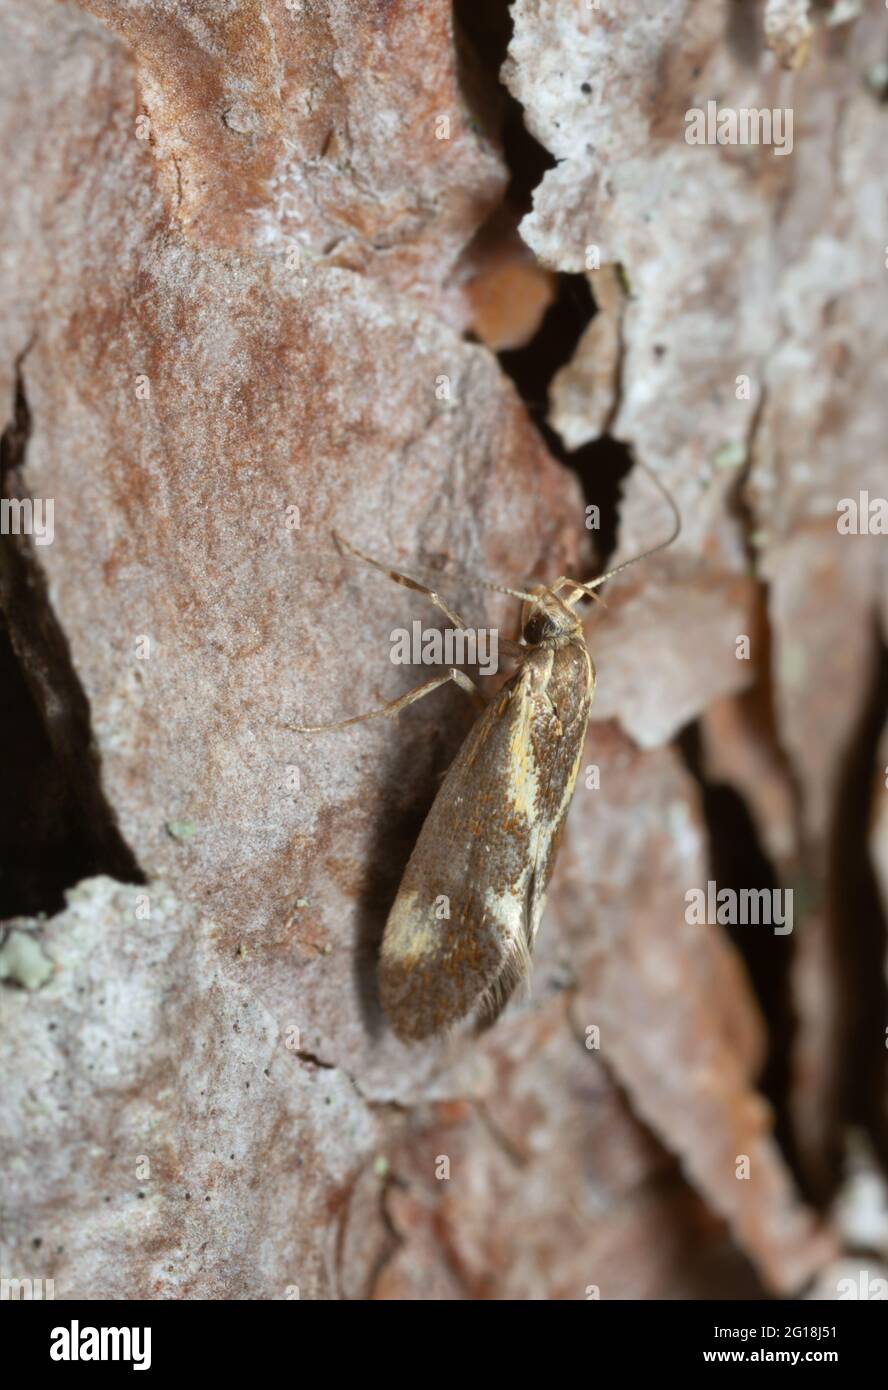 Concealer moth, Metalampra cinnamomea photographed with high magnification Stock Photo